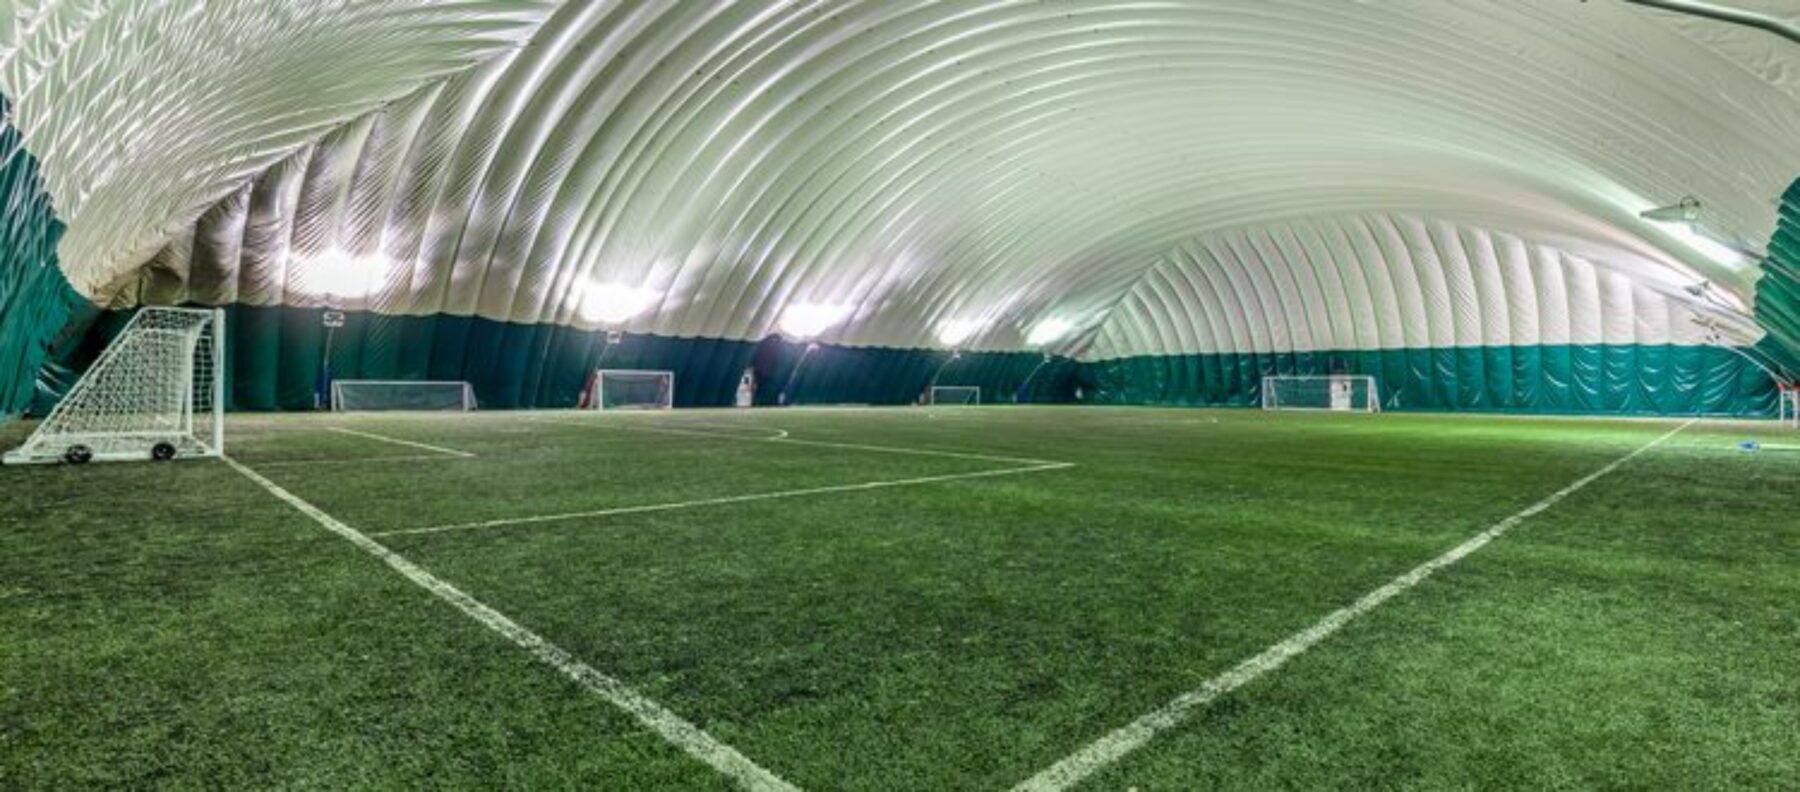 Facility Image Crop Crystal Palace National Sports Centre 02 02 2016 11